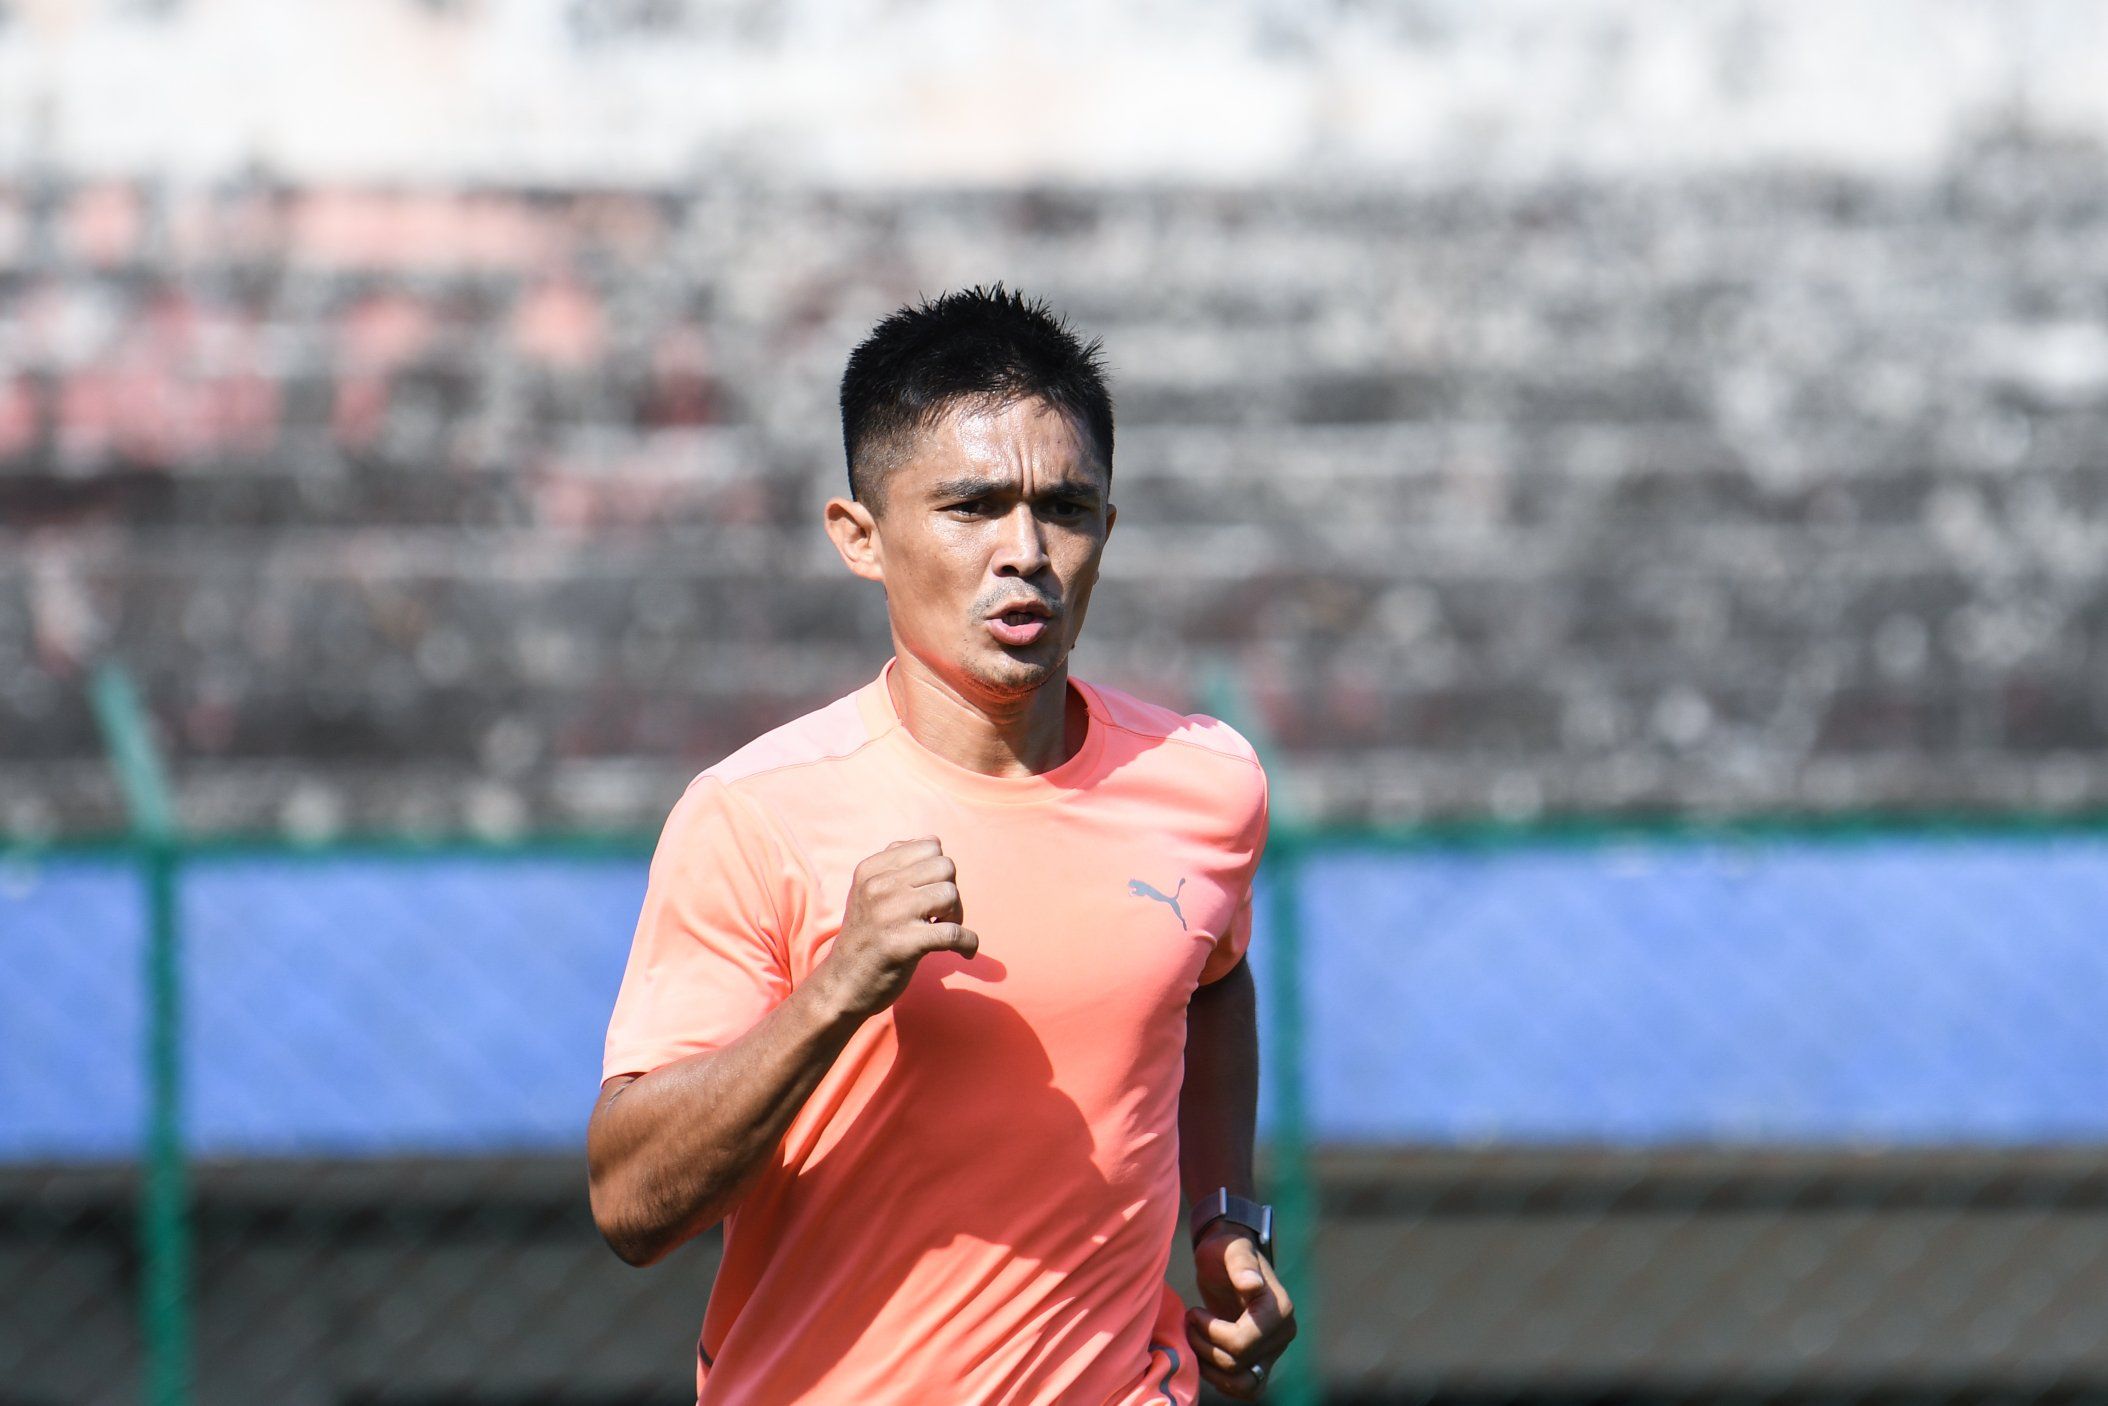 ‘This is past’: Sunil Chhetri after surpassing Lionel Messi’s record